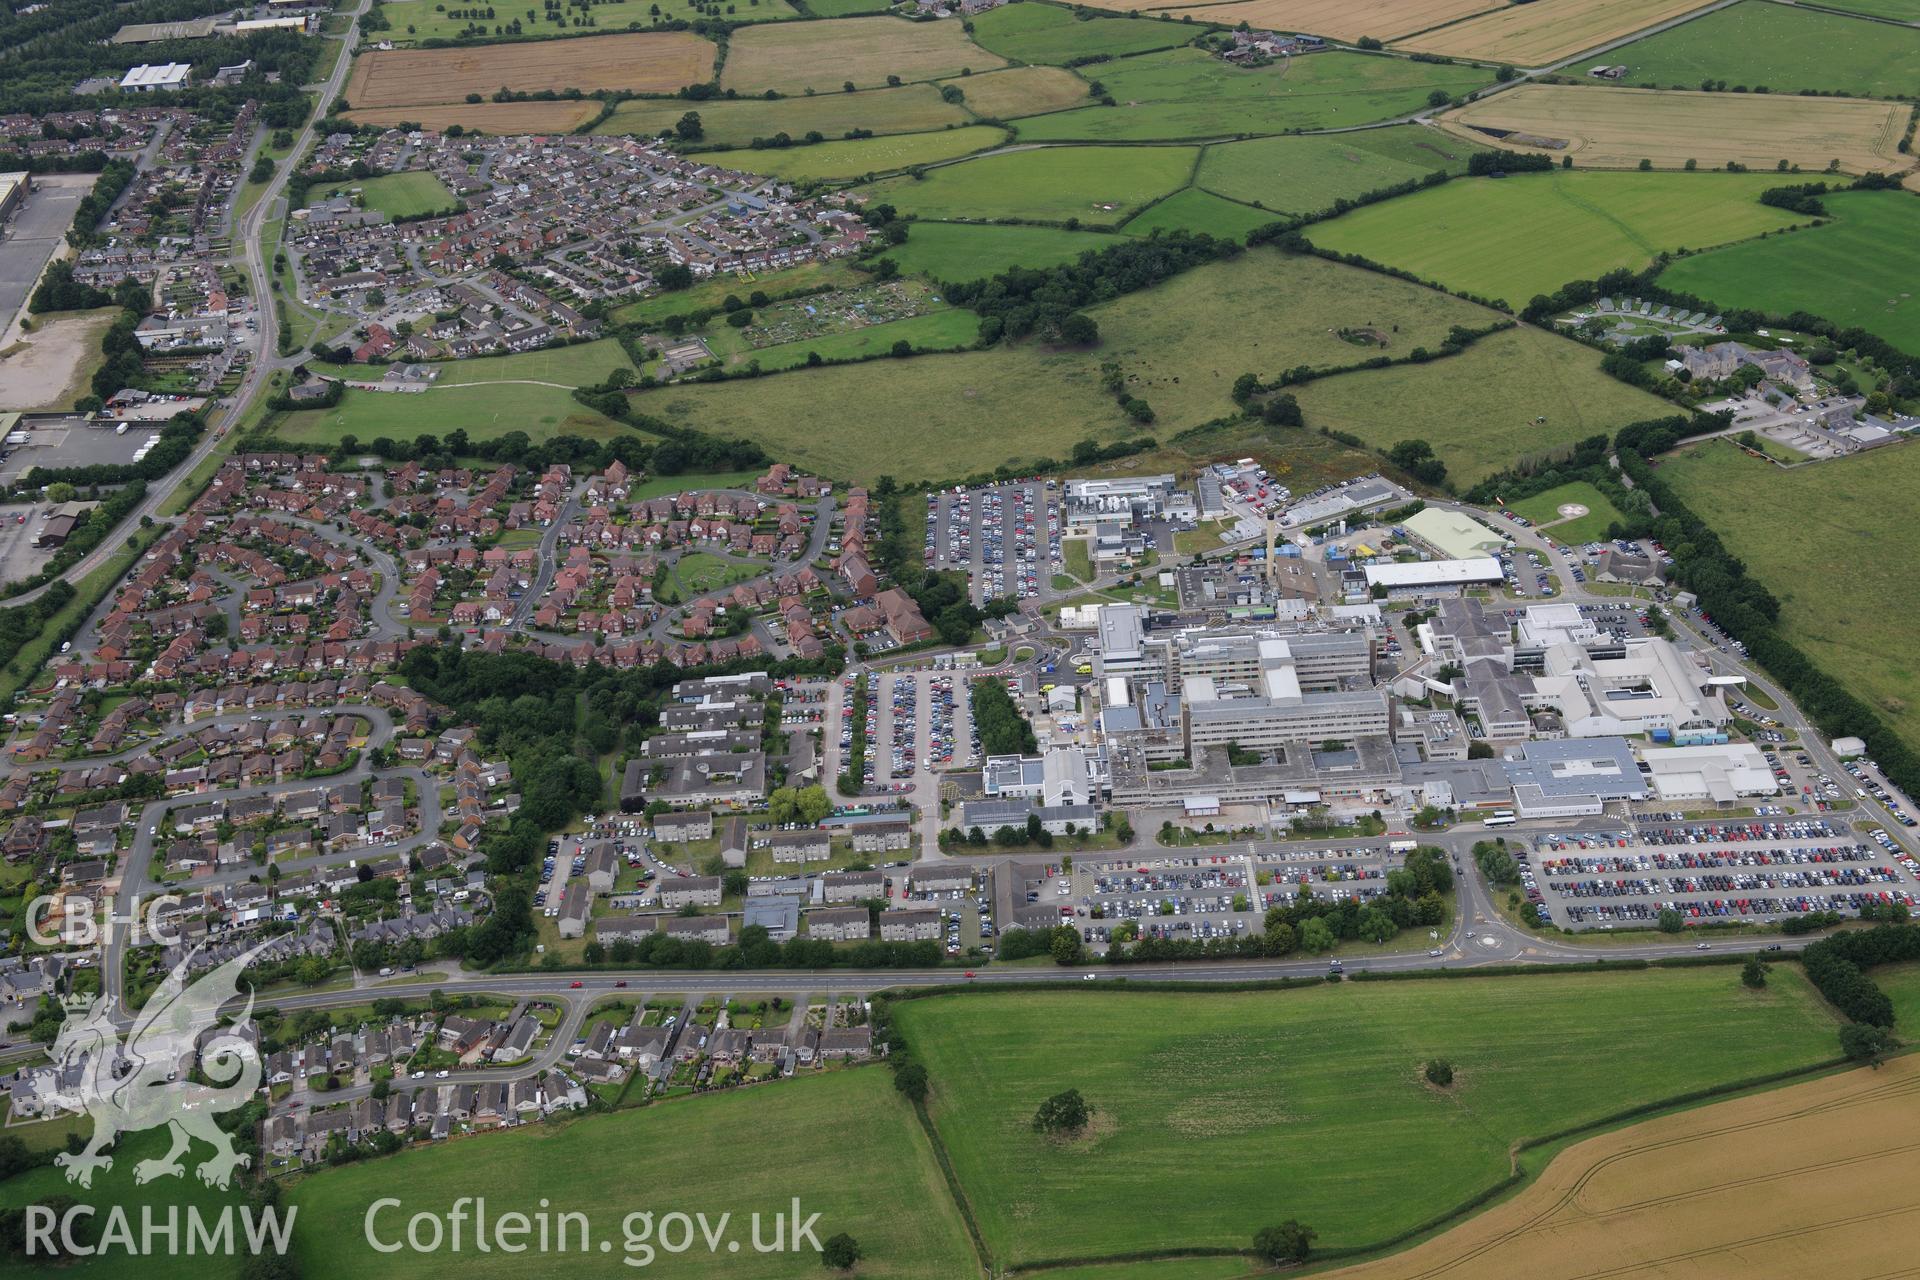 Ysbyty Glan Glwyd Hospital, Bodelwyddan. Oblique aerial photograph taken during the Royal Commission's programme of archaeological aerial reconnaissance by Toby Driver on 30th July 2015.